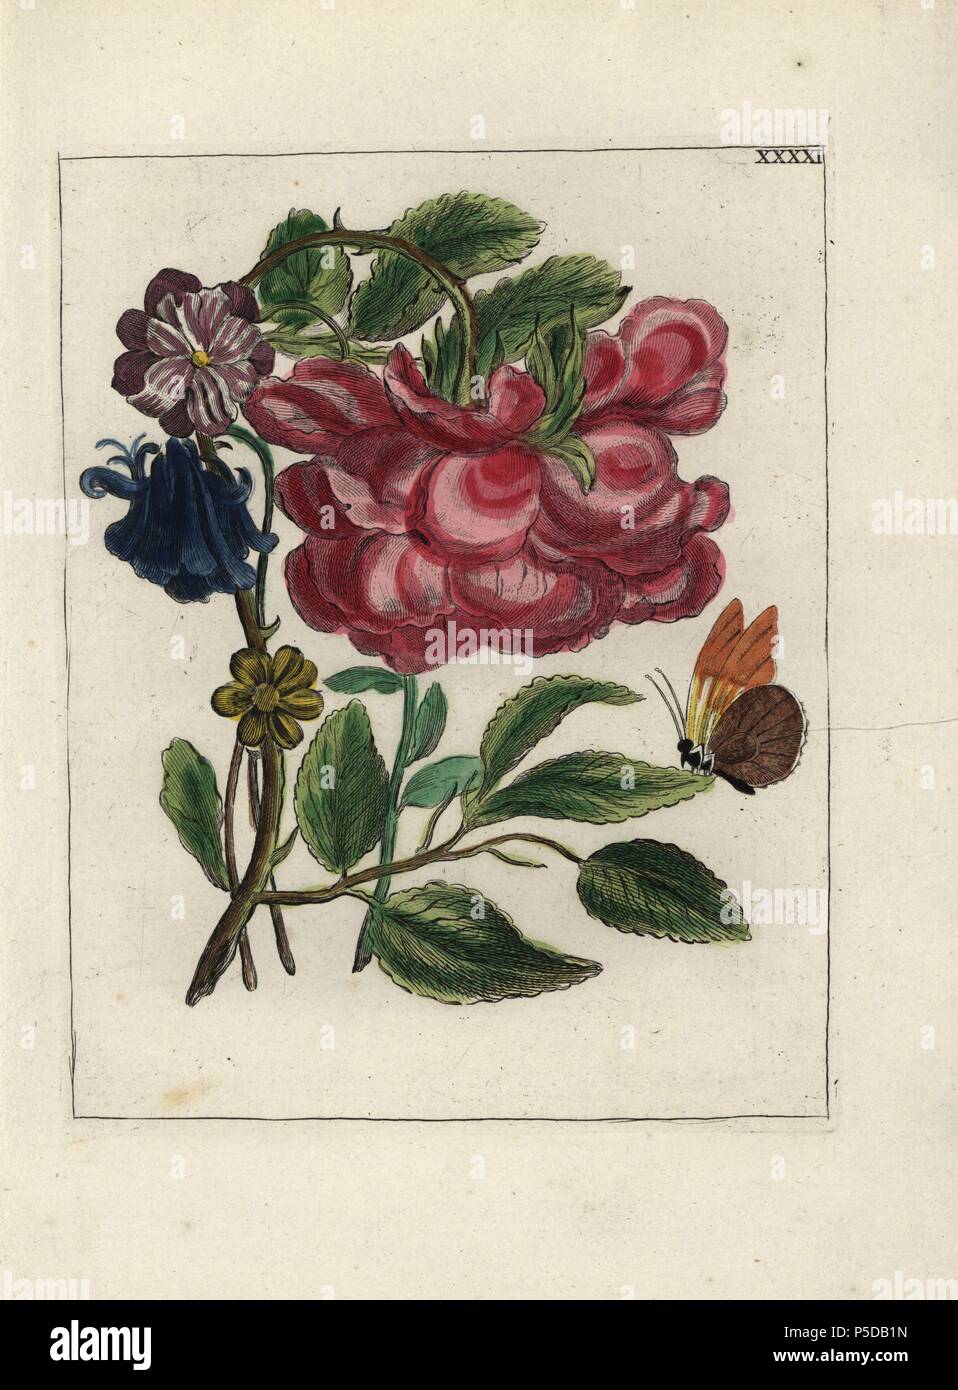 Rose, Rosa provincialis, and columbine, Aquilegia vulgaris, with butterfly. Handcoloured copperplate botanical engraving from 'Nederlandsch Bloemwerk' (Dutch Flower Arrangements), Amsterdam, J.B. Elwe, 1794. The artist of the fine plates is a mystery: the title bouquet has the signature of Paul Theodor van Brussel (1754-1795), the Dutch flower painter, and one auricula is 'drawn from life' by A. Bres. According to Hunt, 30 plates show the influence of the famous French artist Nicolas Robert (1614-1685). Stock Photo